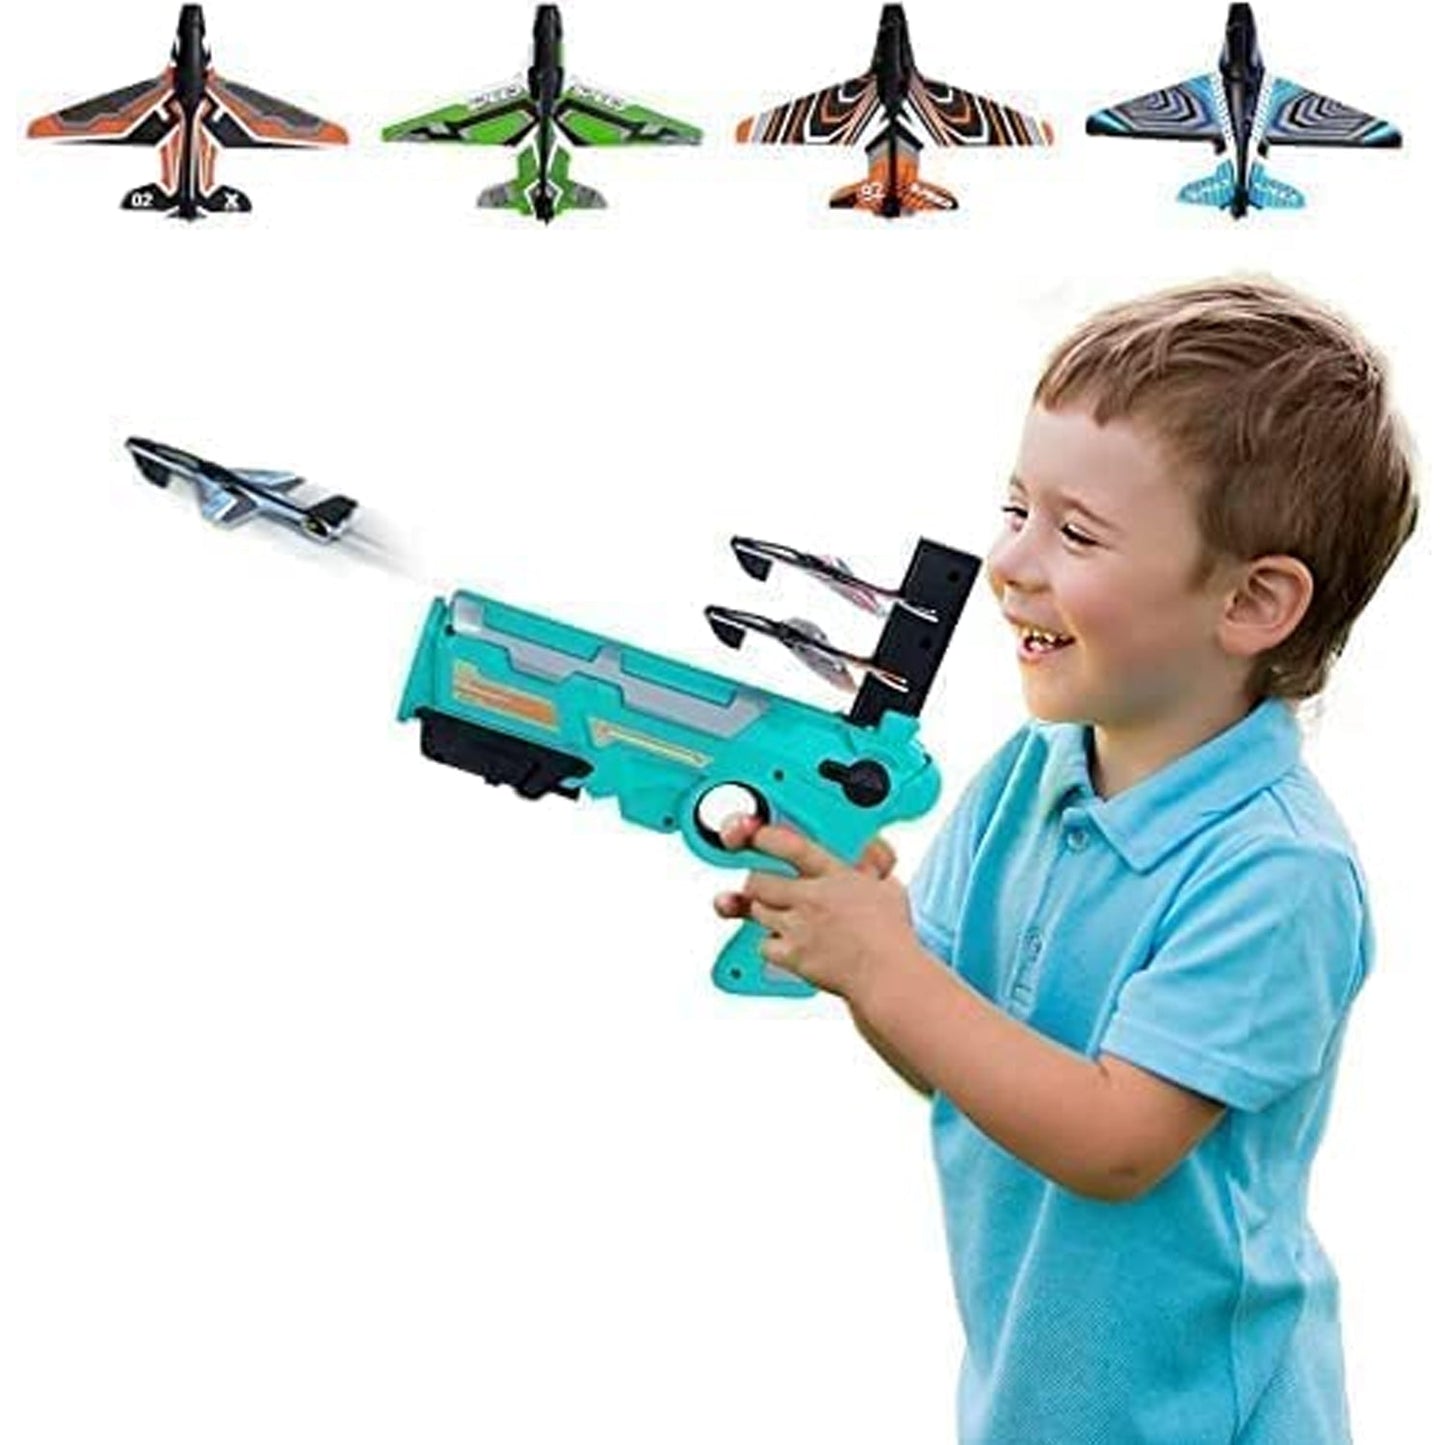 4413A Airplane Launcher Gun Toy with Foam Glider Planes, Outdoor Games for Children, Best Aeroplane Toys for Kids, Air Battle Gun Toys  ( 5 Plane Include ) Dukandaily